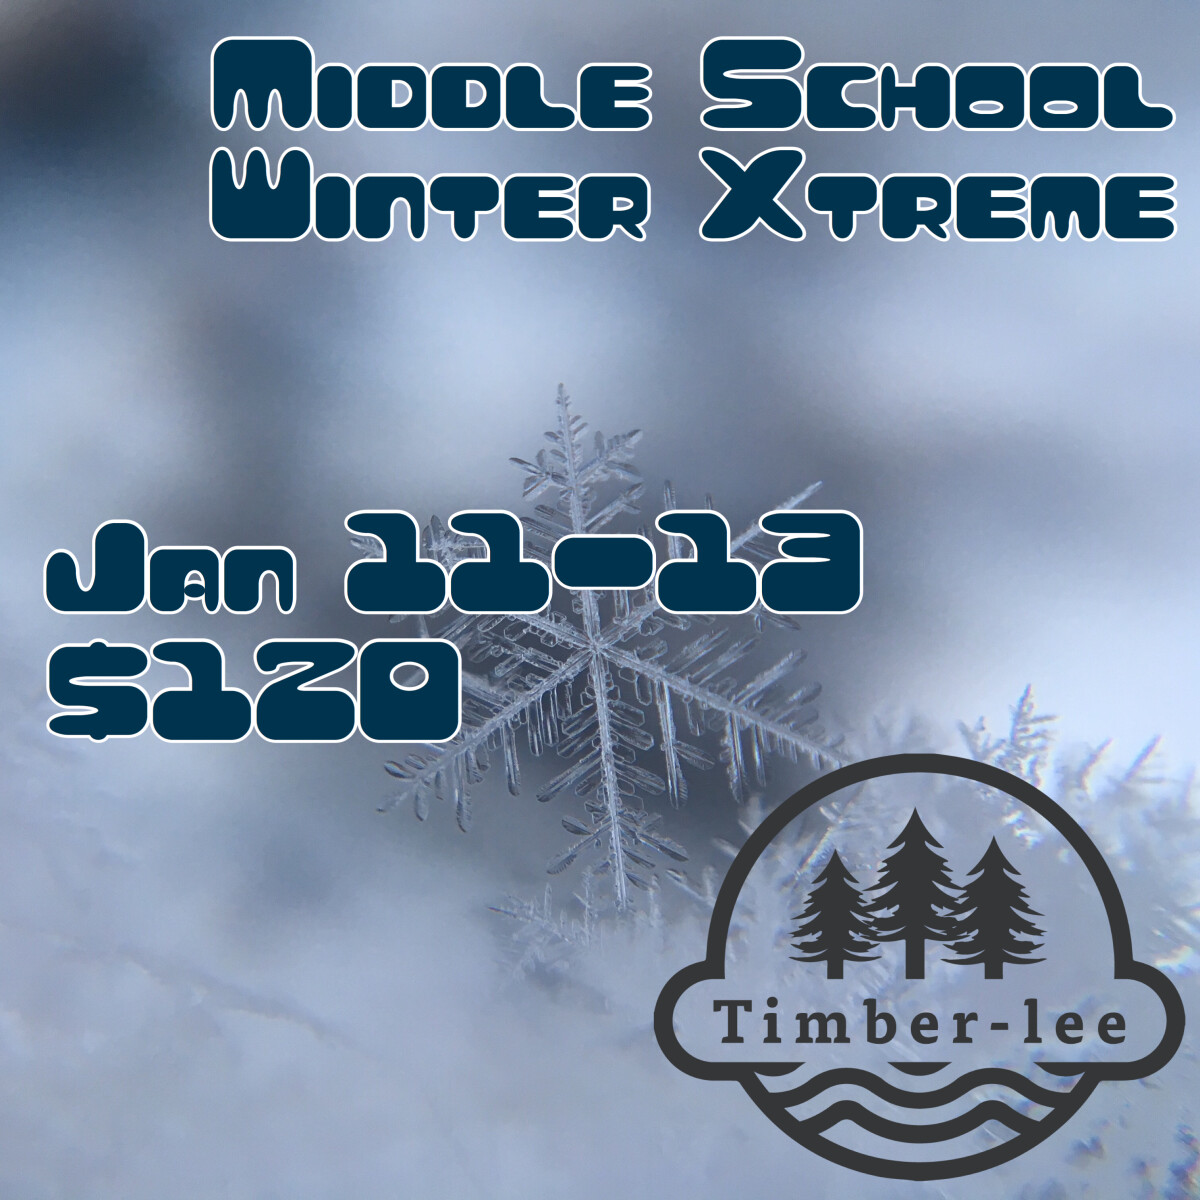 Middle School Winter Xtreme